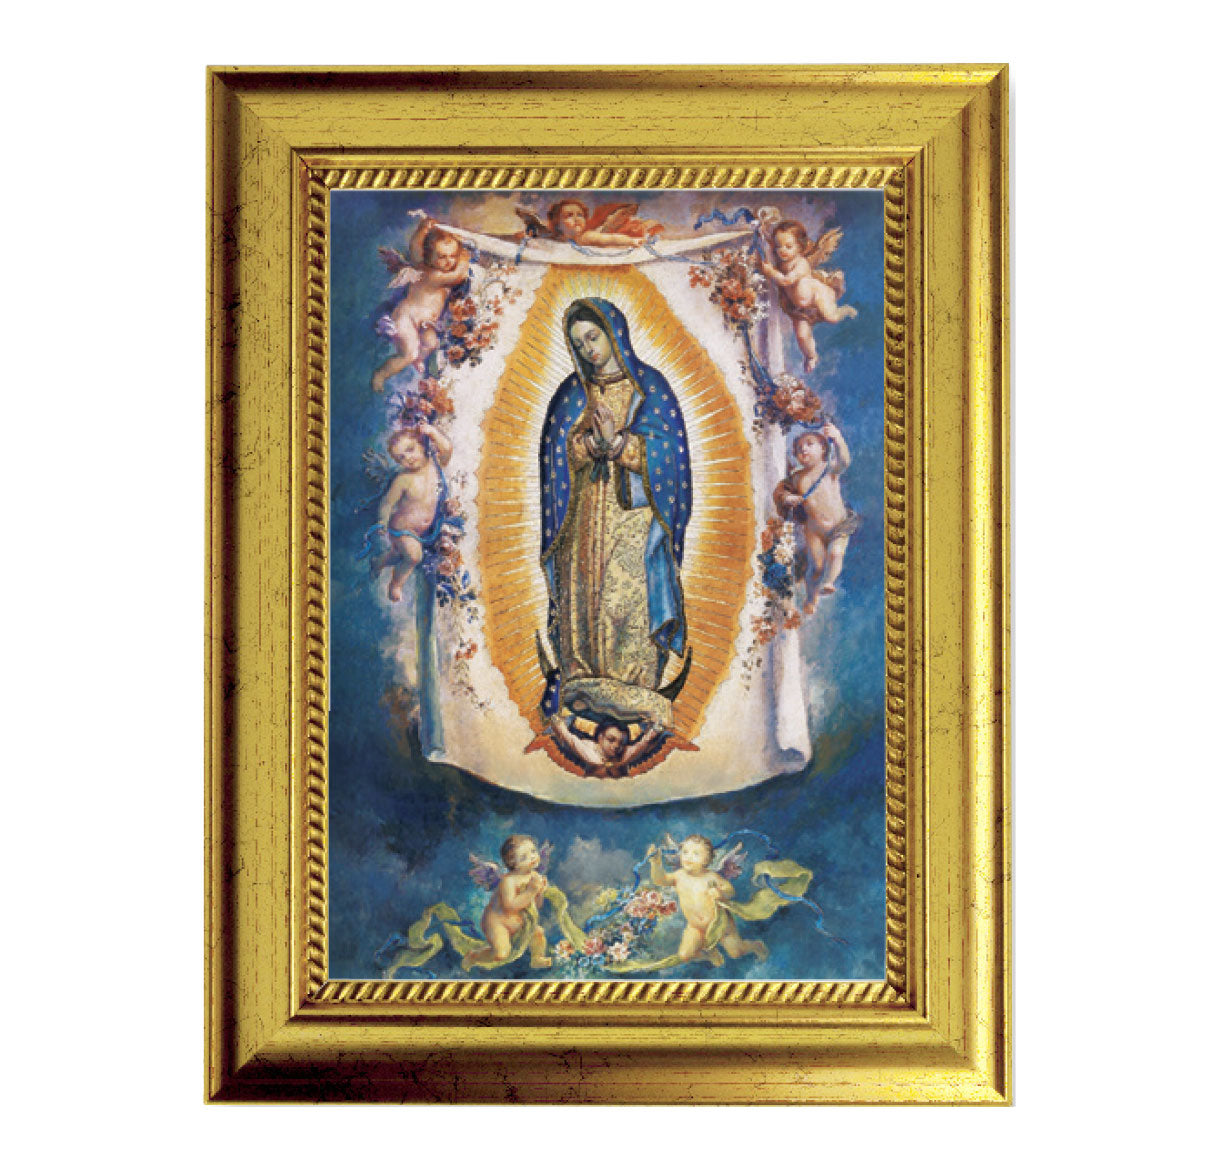 Our Lady of Guadalupe Picture Framed Wall Art Decor, Small, Antique Gold-Leaf Frame with Rope Detailed Lip